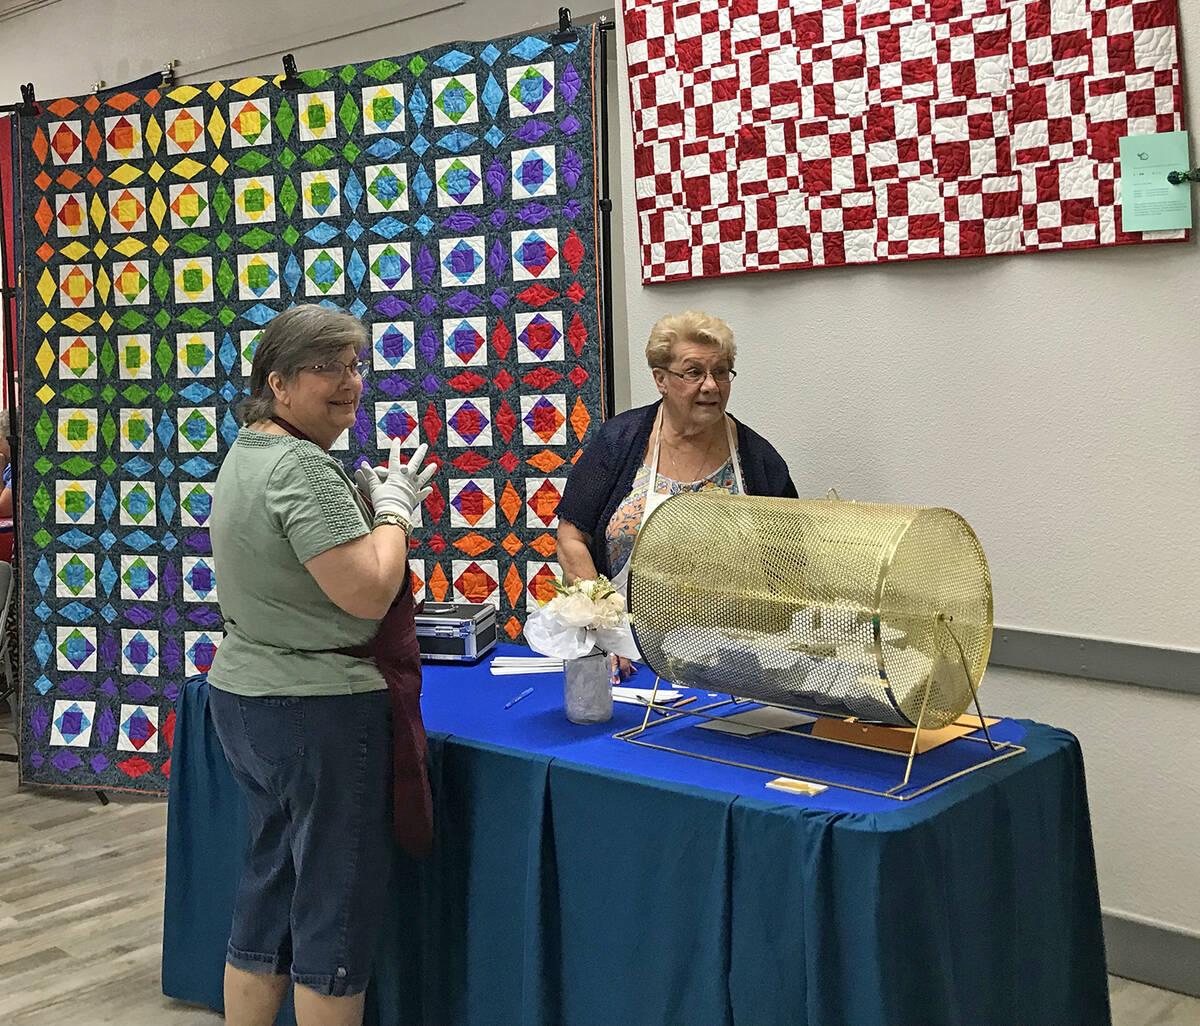 Robin Hebrock/Pahrump Valley Times Pictured in the background is the Opportunity Quilt, a multi ...